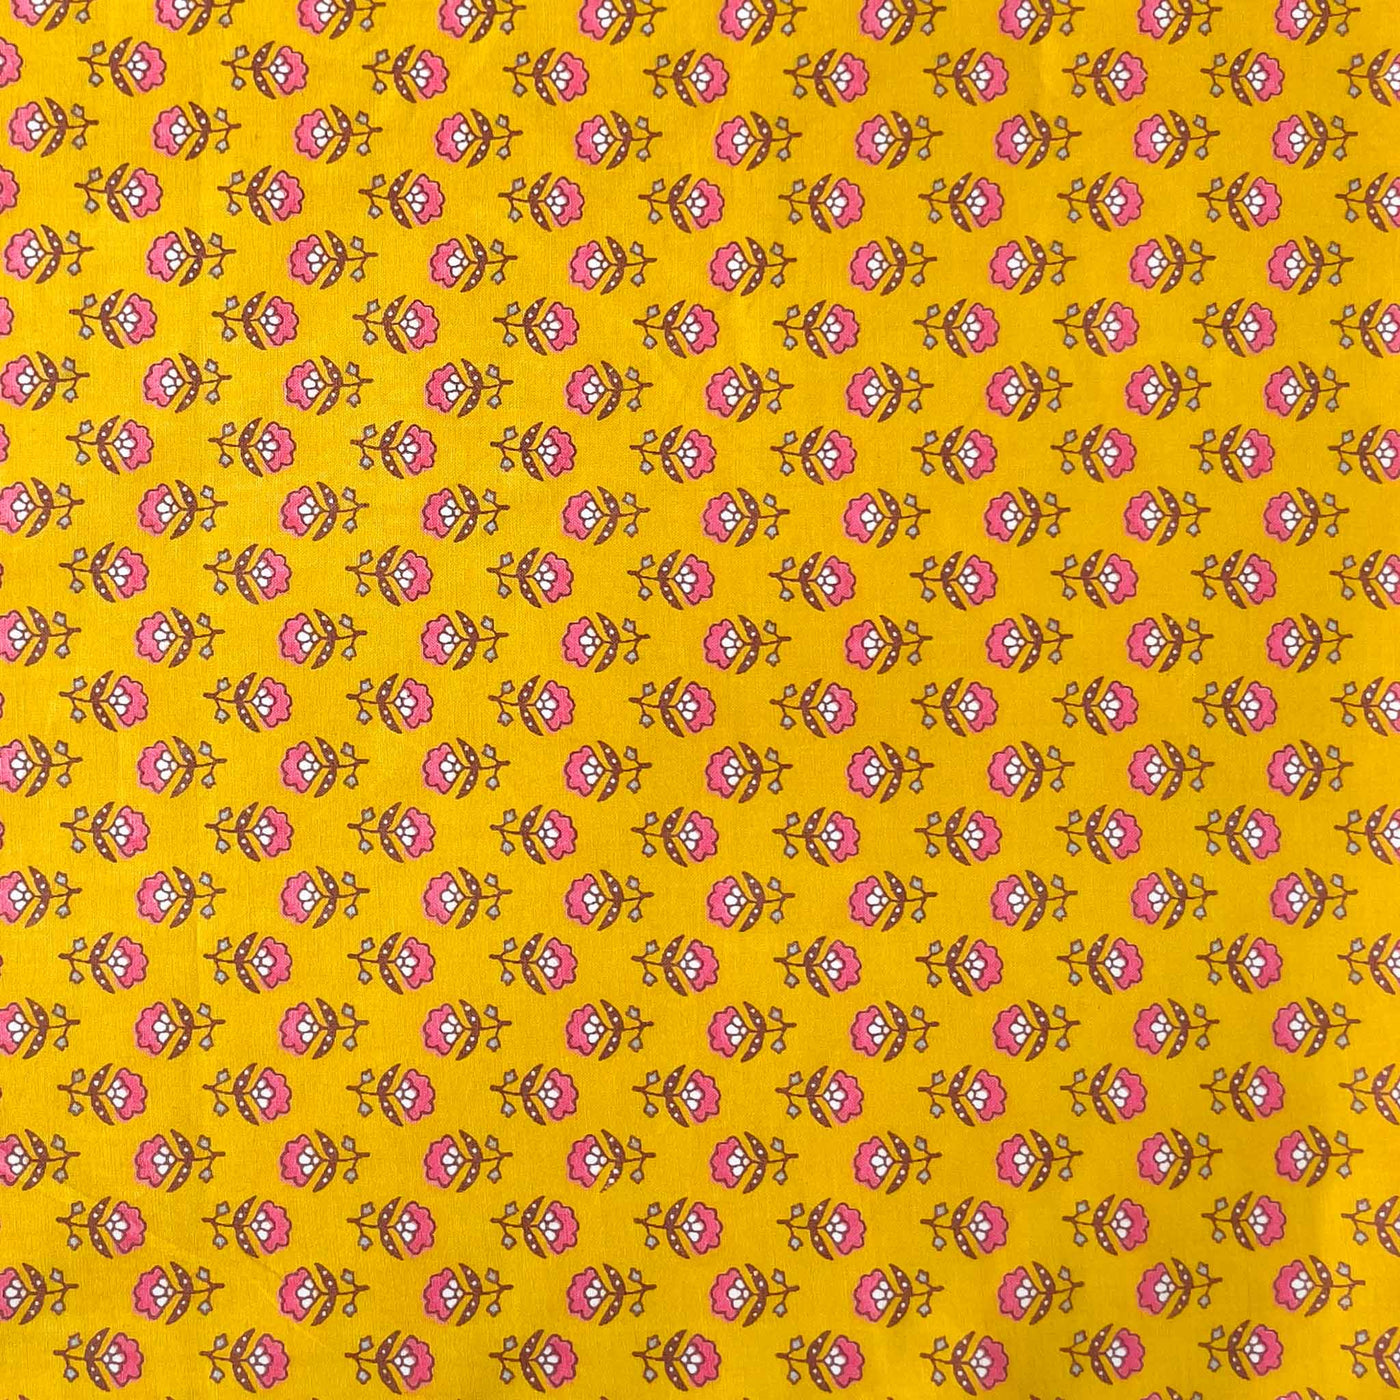 Fabric Pandit Cut Piece (CUT PIECE) Pink & Yellow Mini Carnations Screen Printed Pure Cotton Fabric (Width 43 inches)